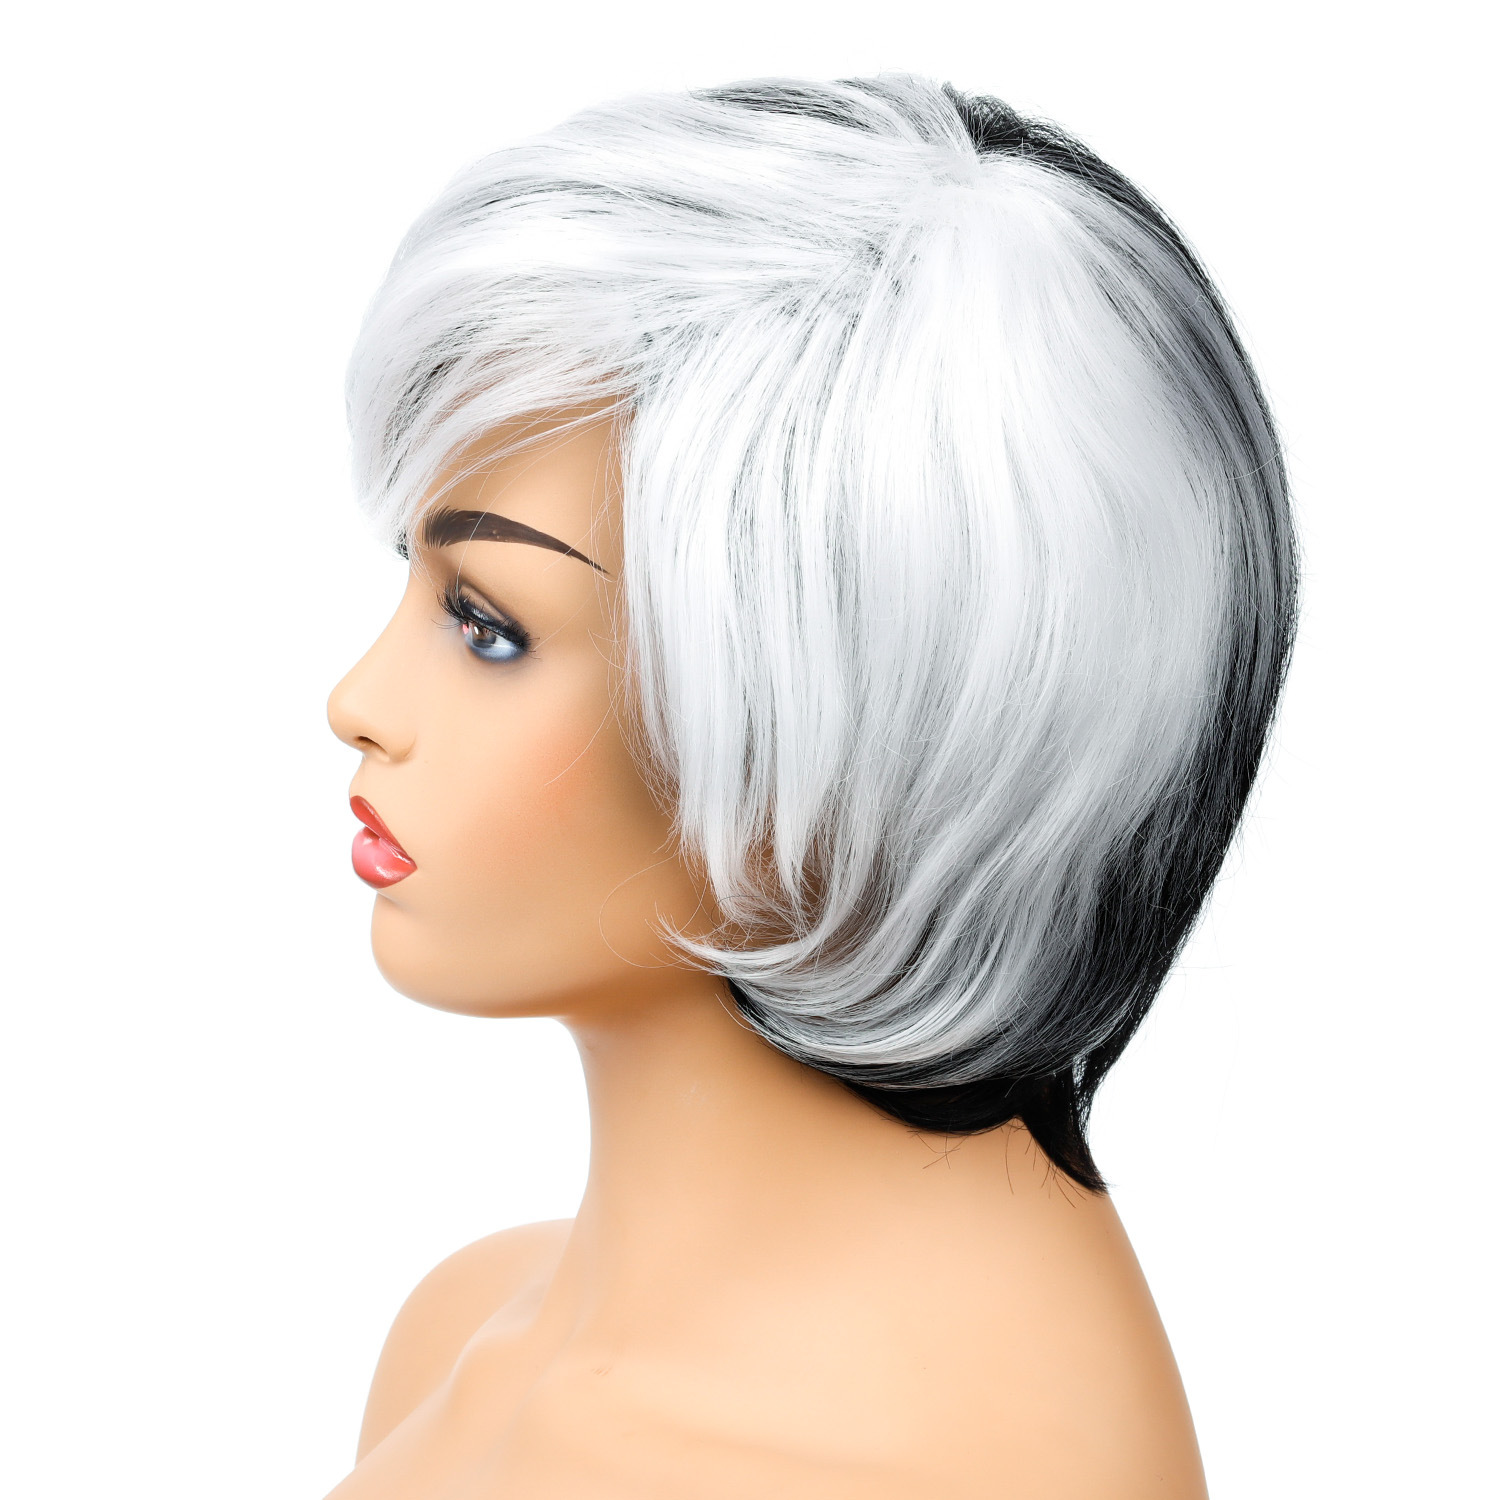 a fashion wig with black and white short hair, perfect for women seeking a trendy look